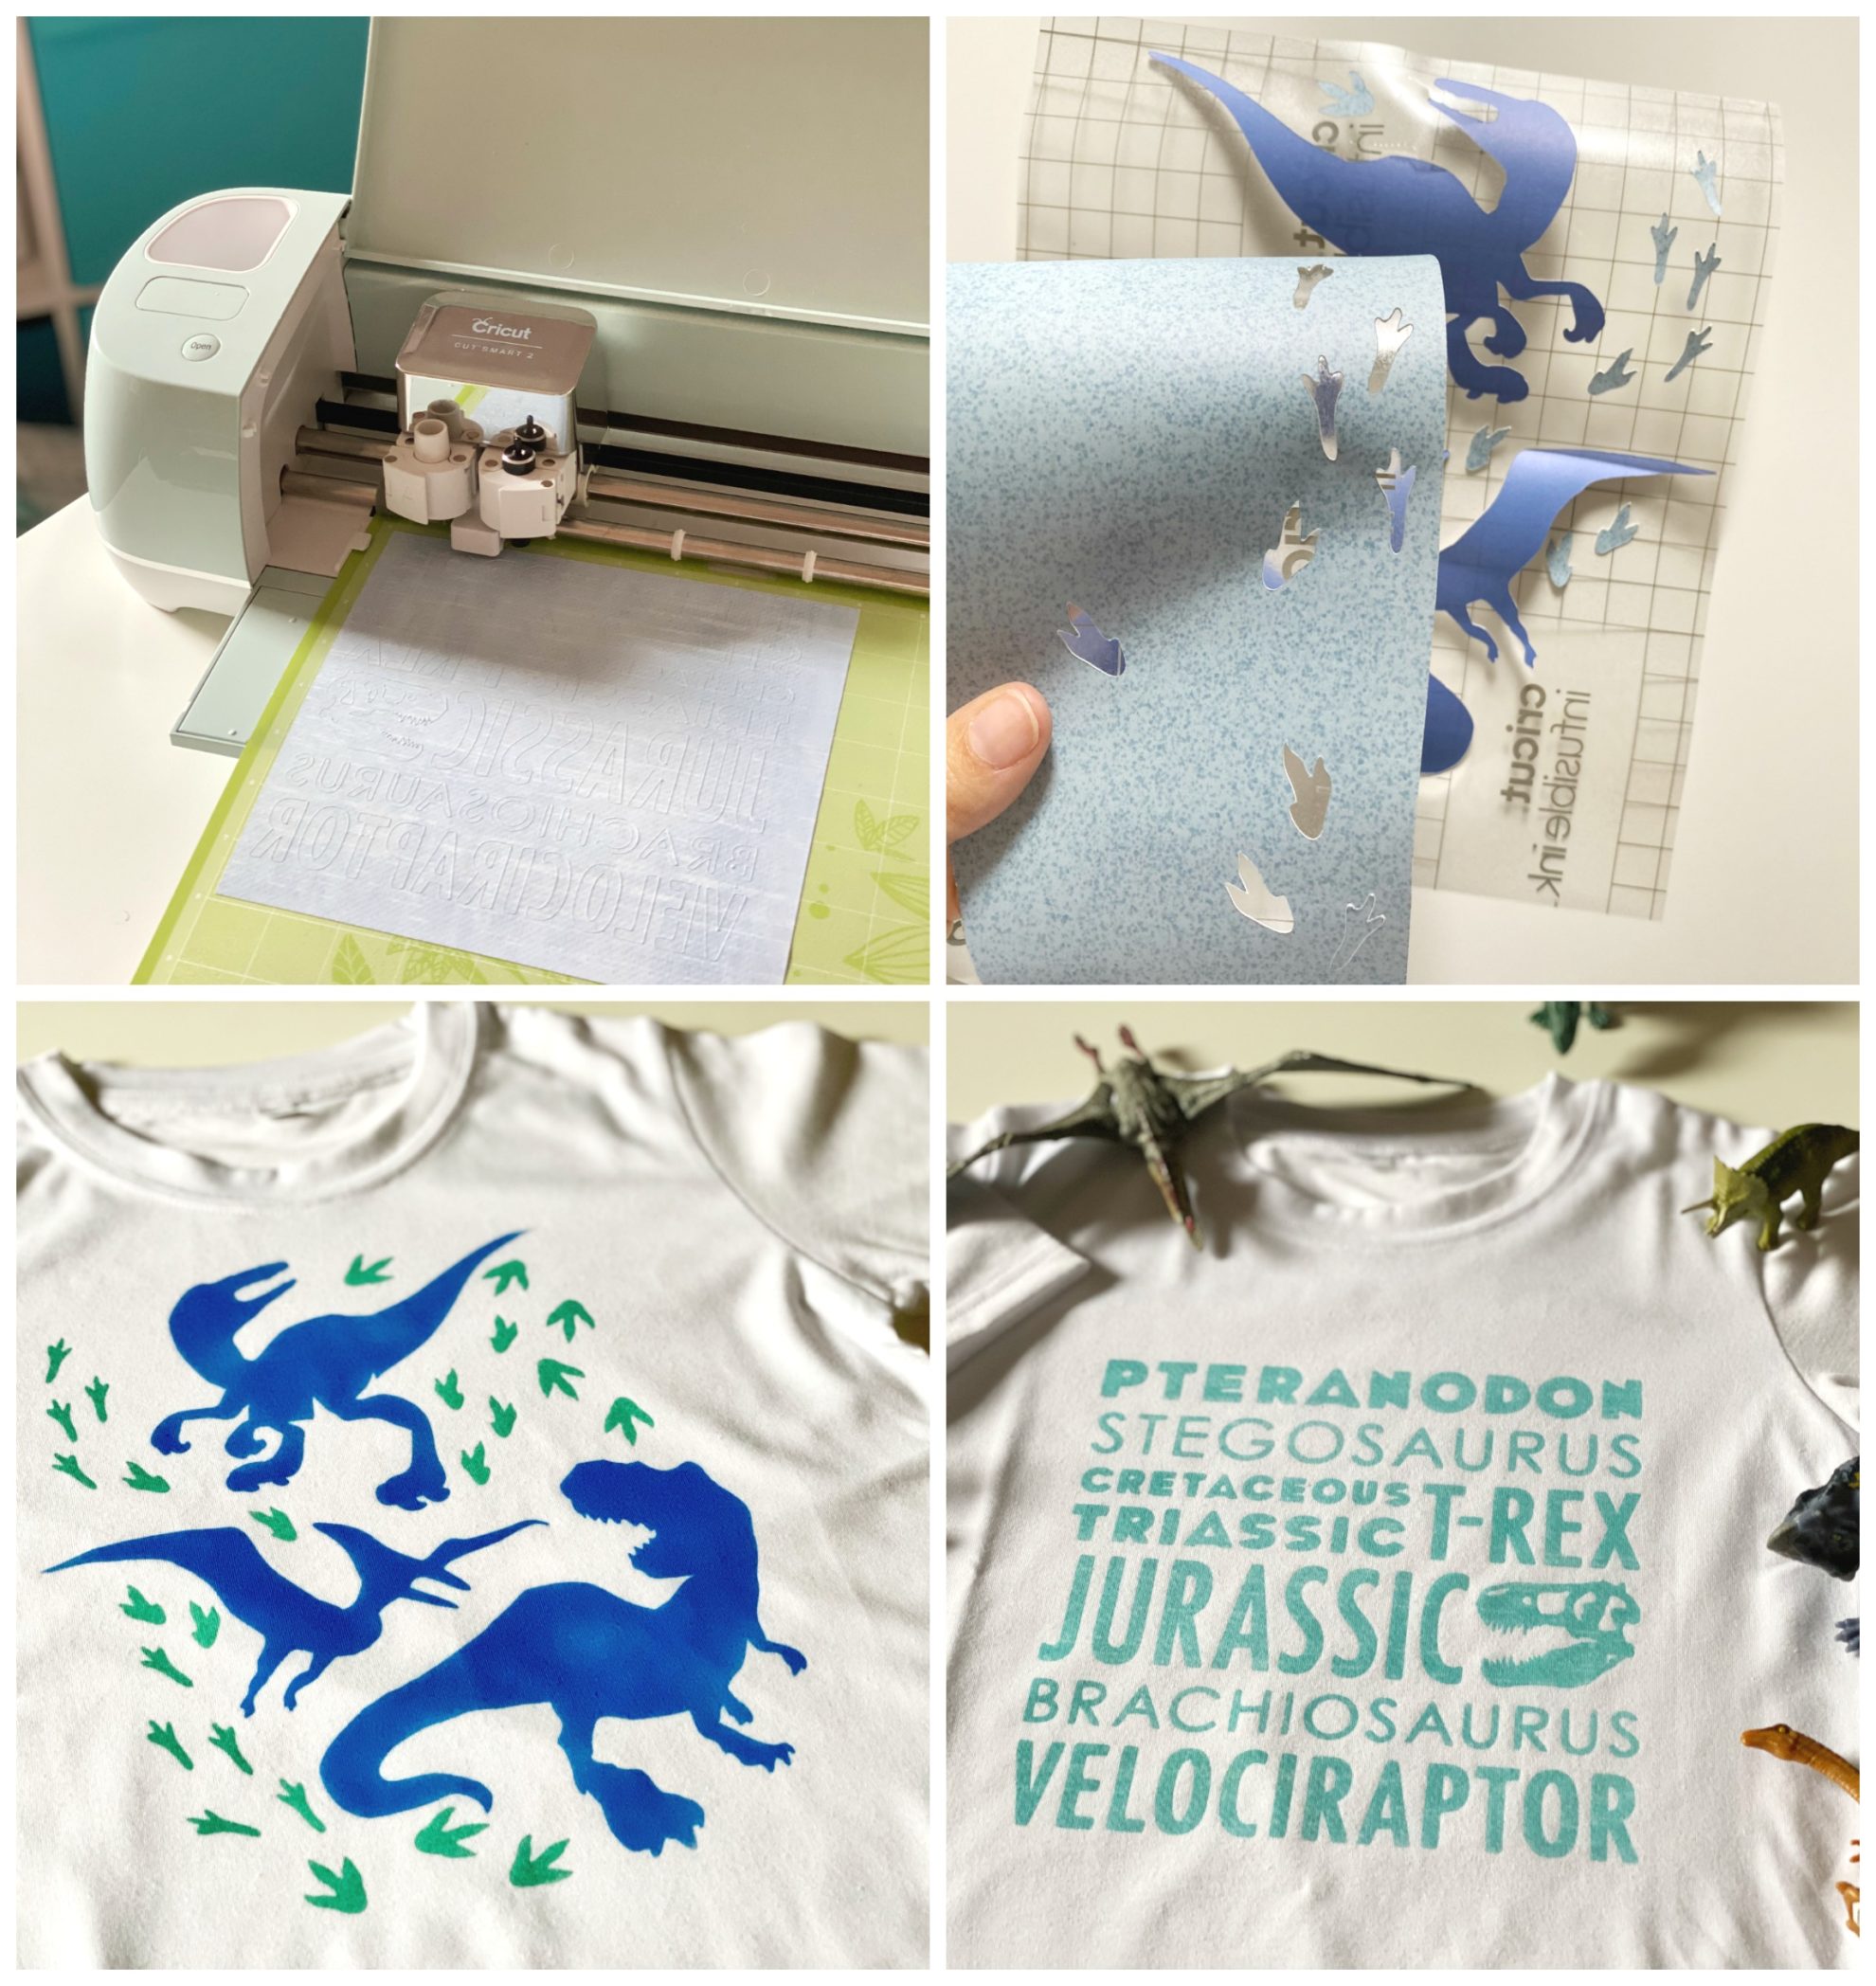 Check out these dinosaur shirts made using Infusible Ink!